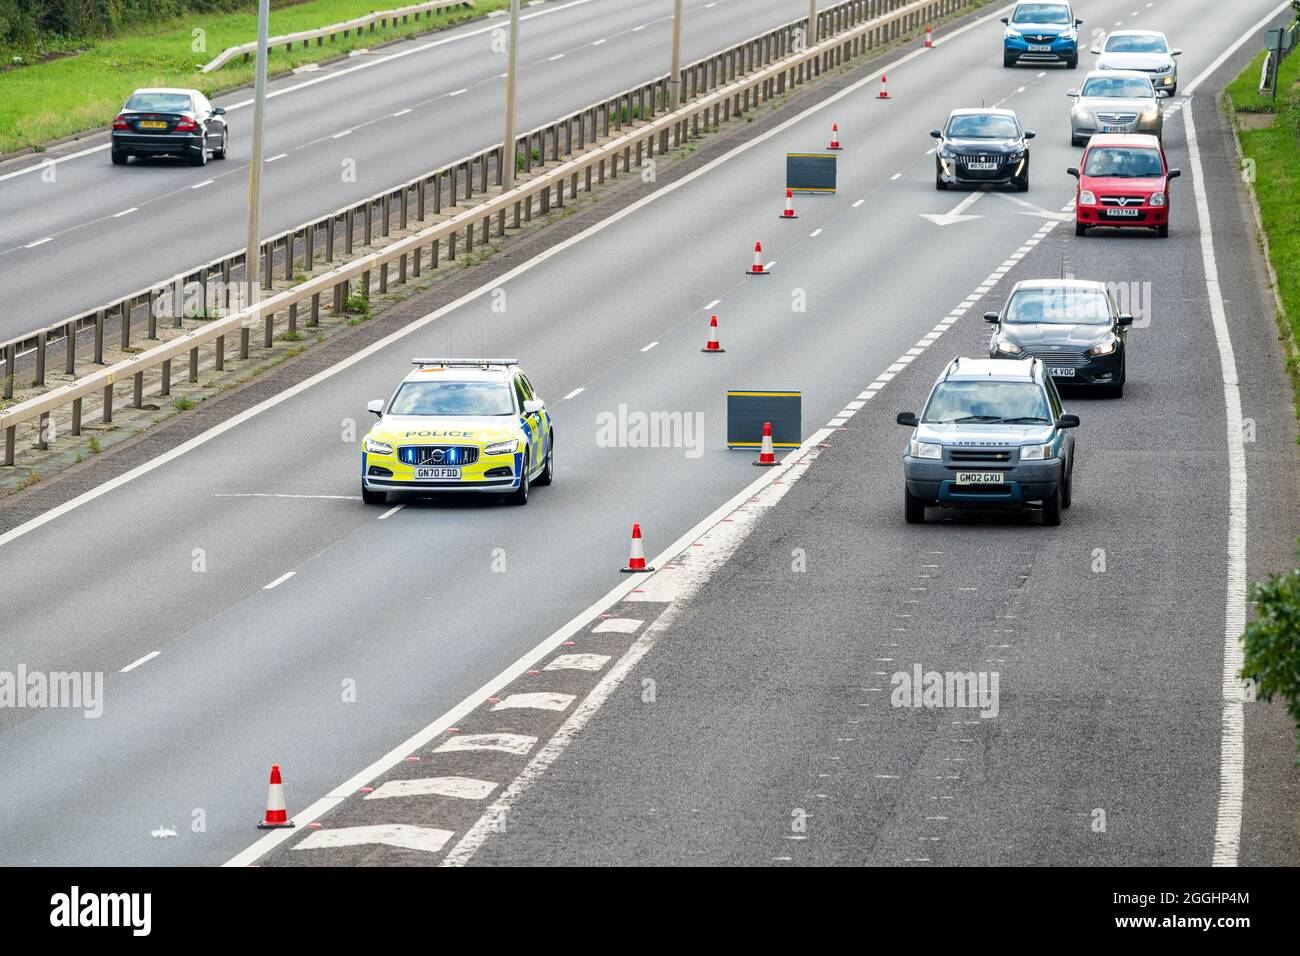 Police car on main road, A299, behind traffic cones and two signs to block the road off and cars using slip road to follow diversion after incident. Stock Photo